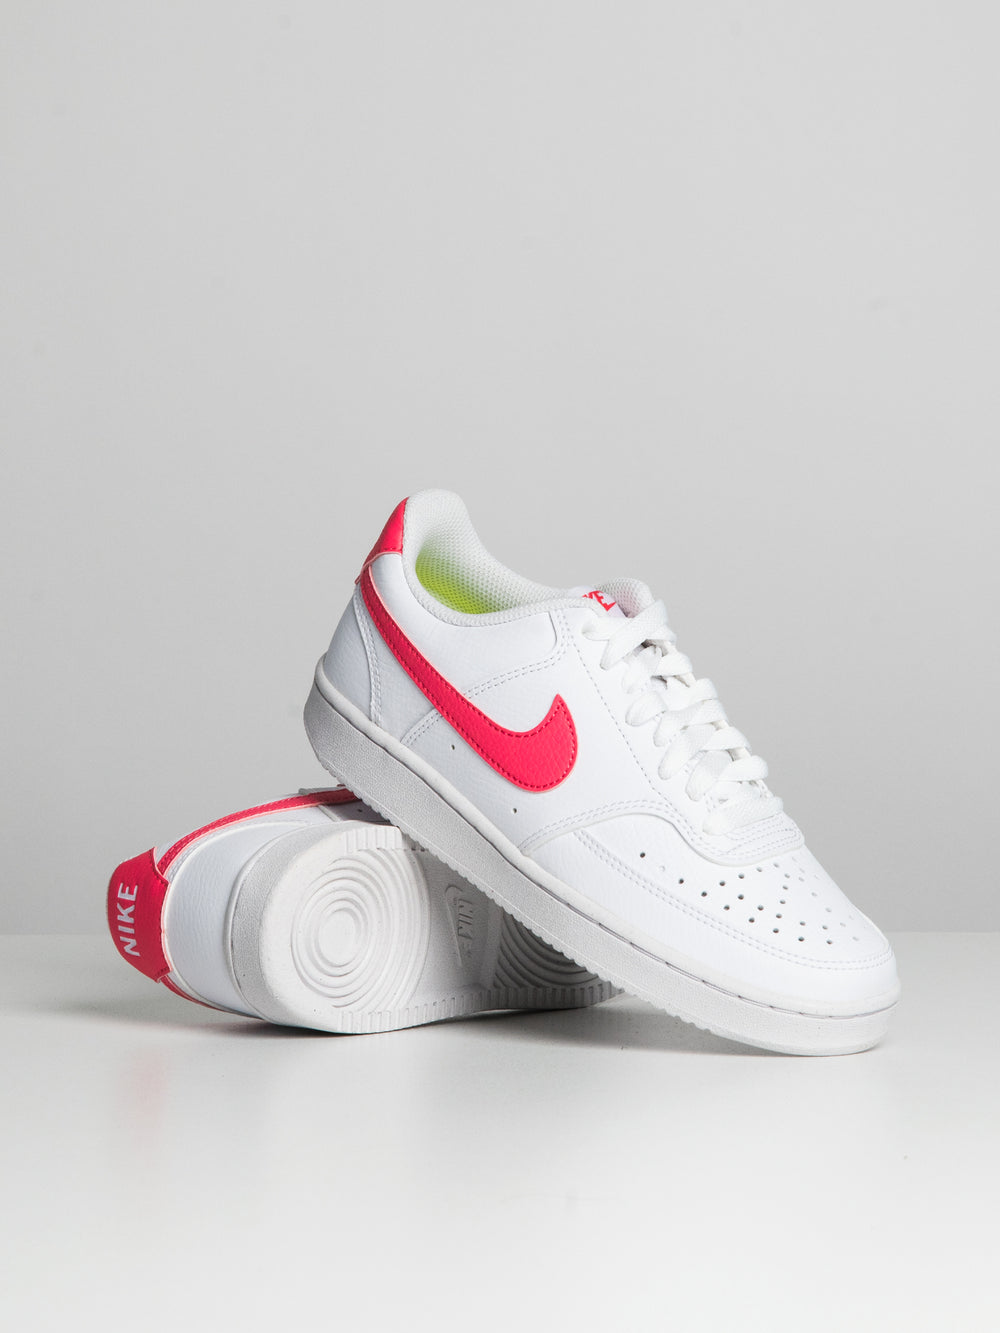 WOMENS NIKE COURT VISION LO